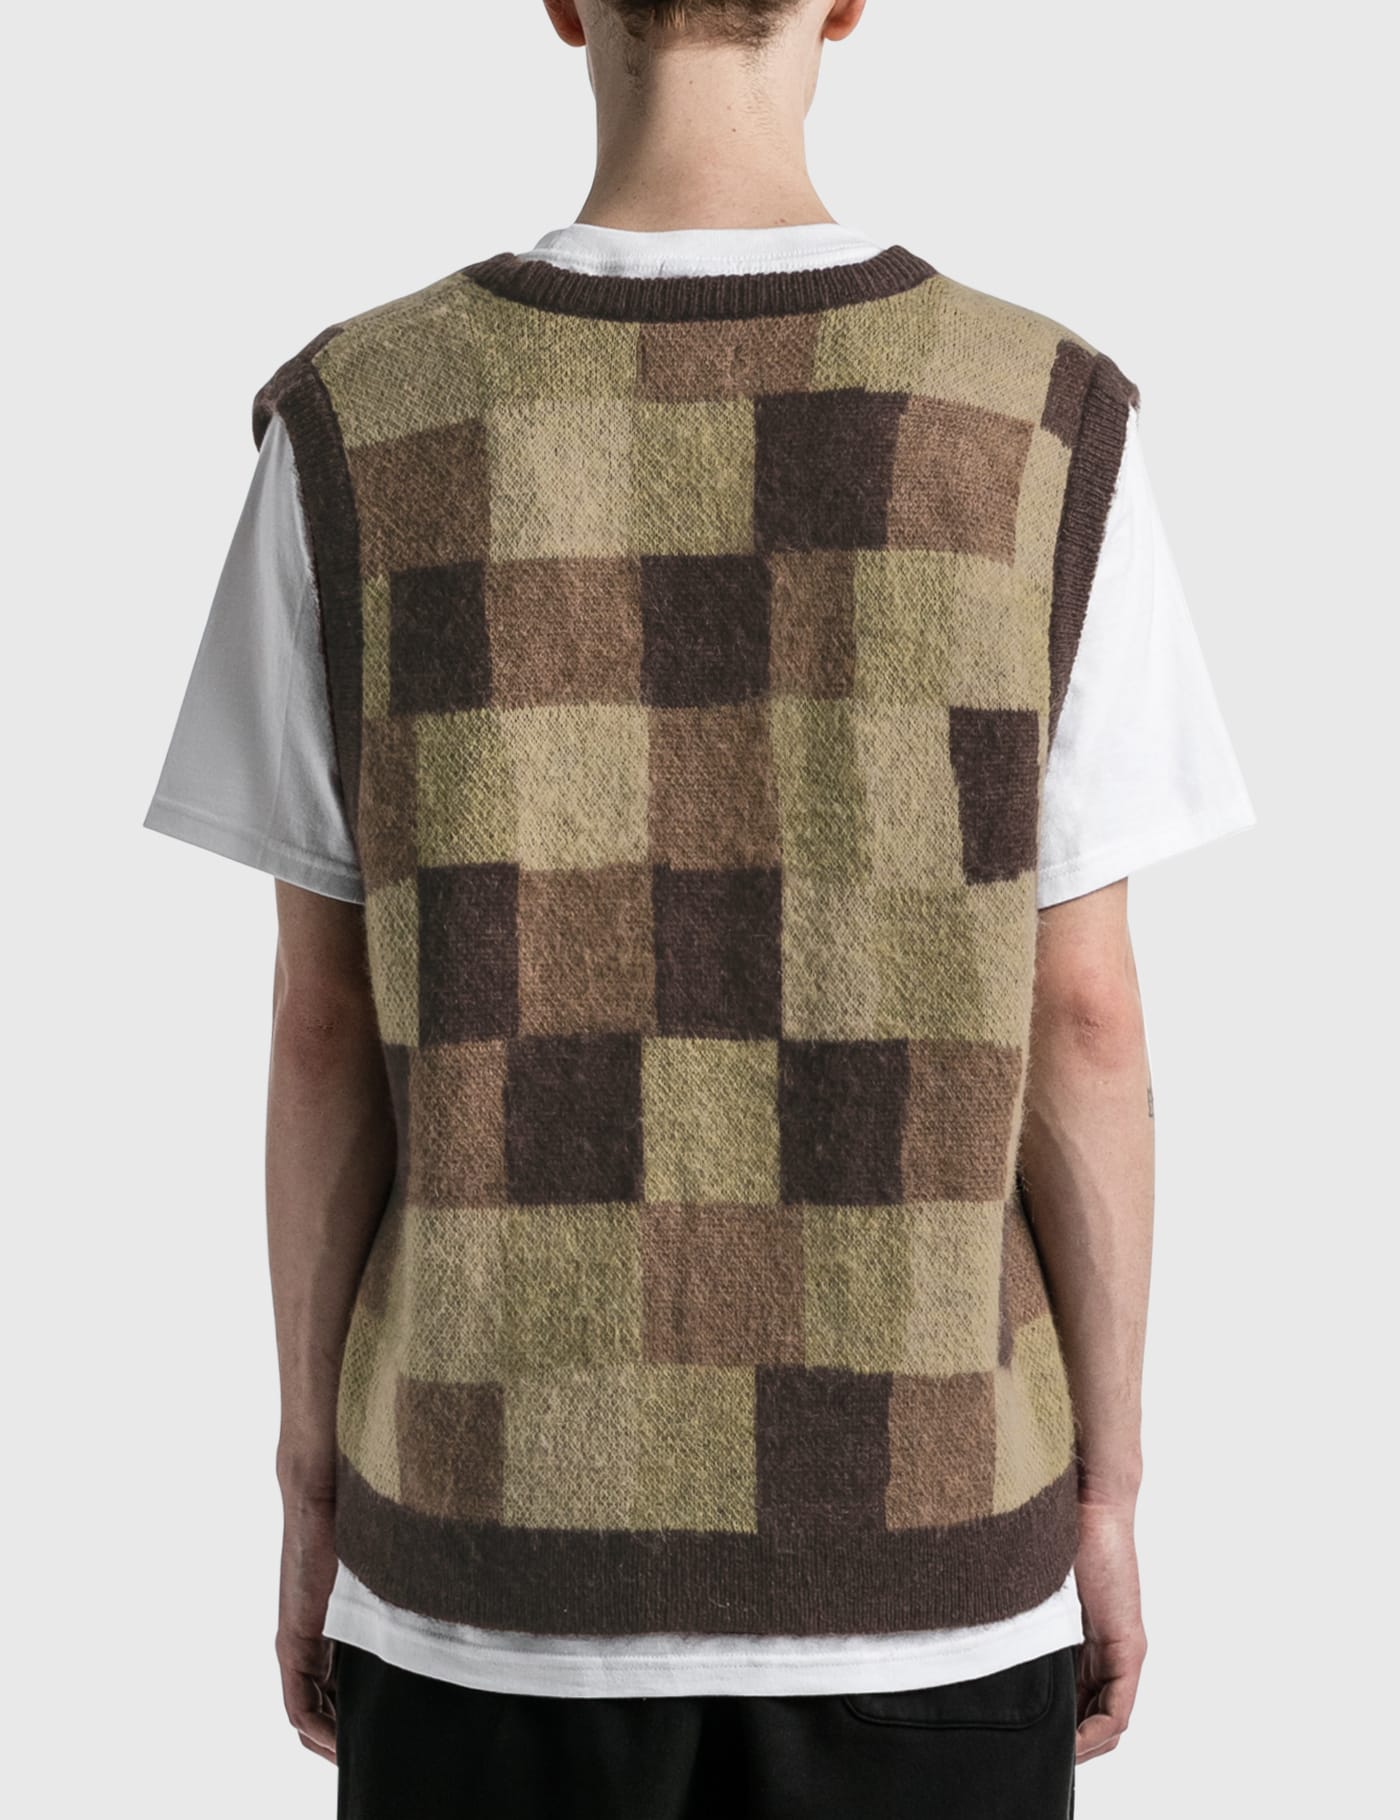 Stussy - Wobbly Check Sweater Vest | HBX - Globally Curated 